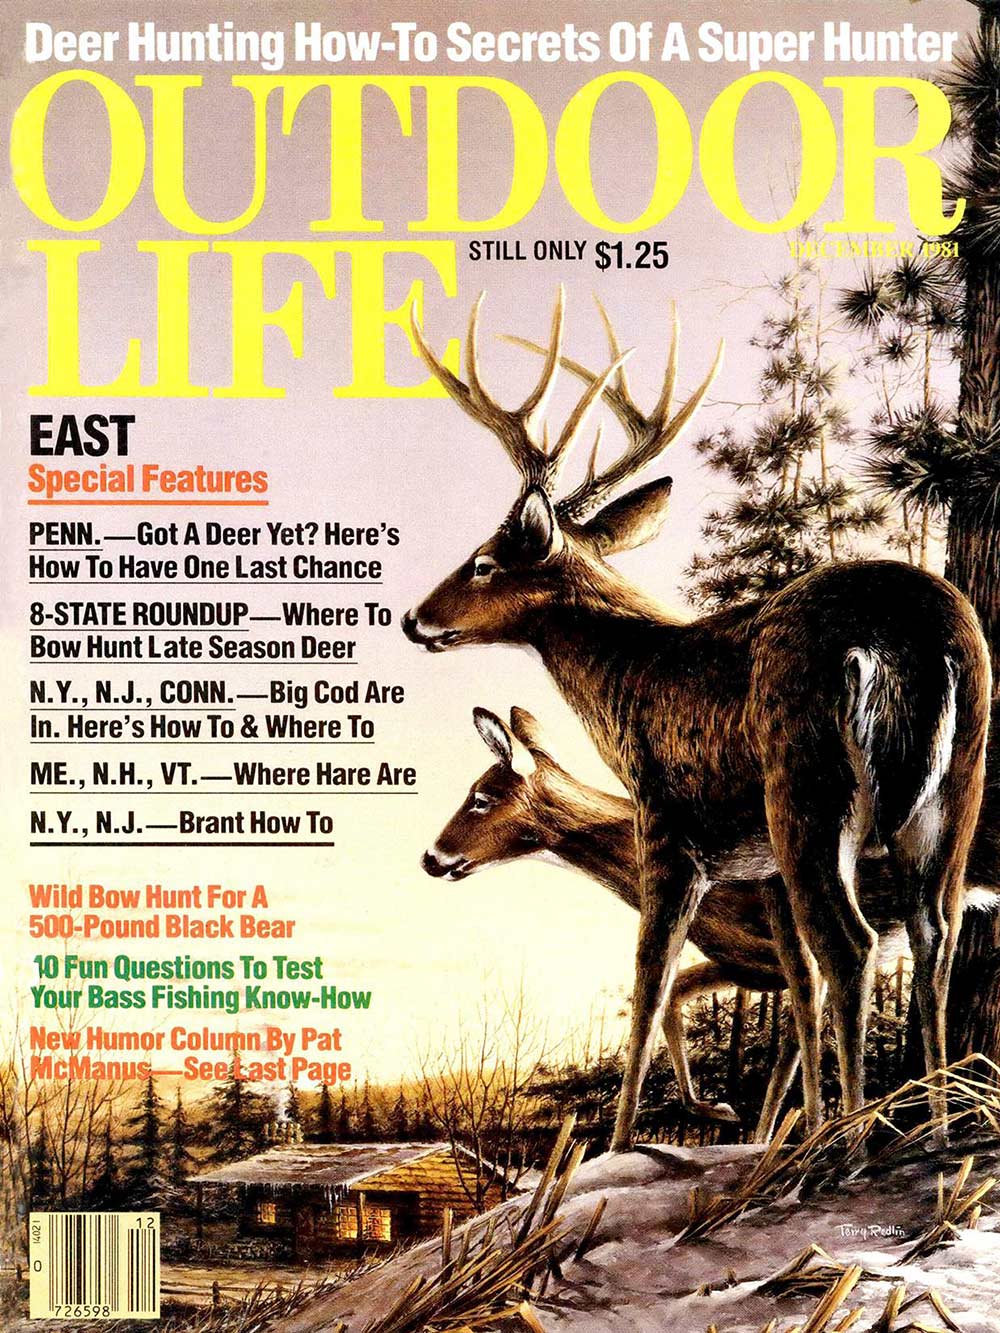 December 1981 Cover of Outdoor Life